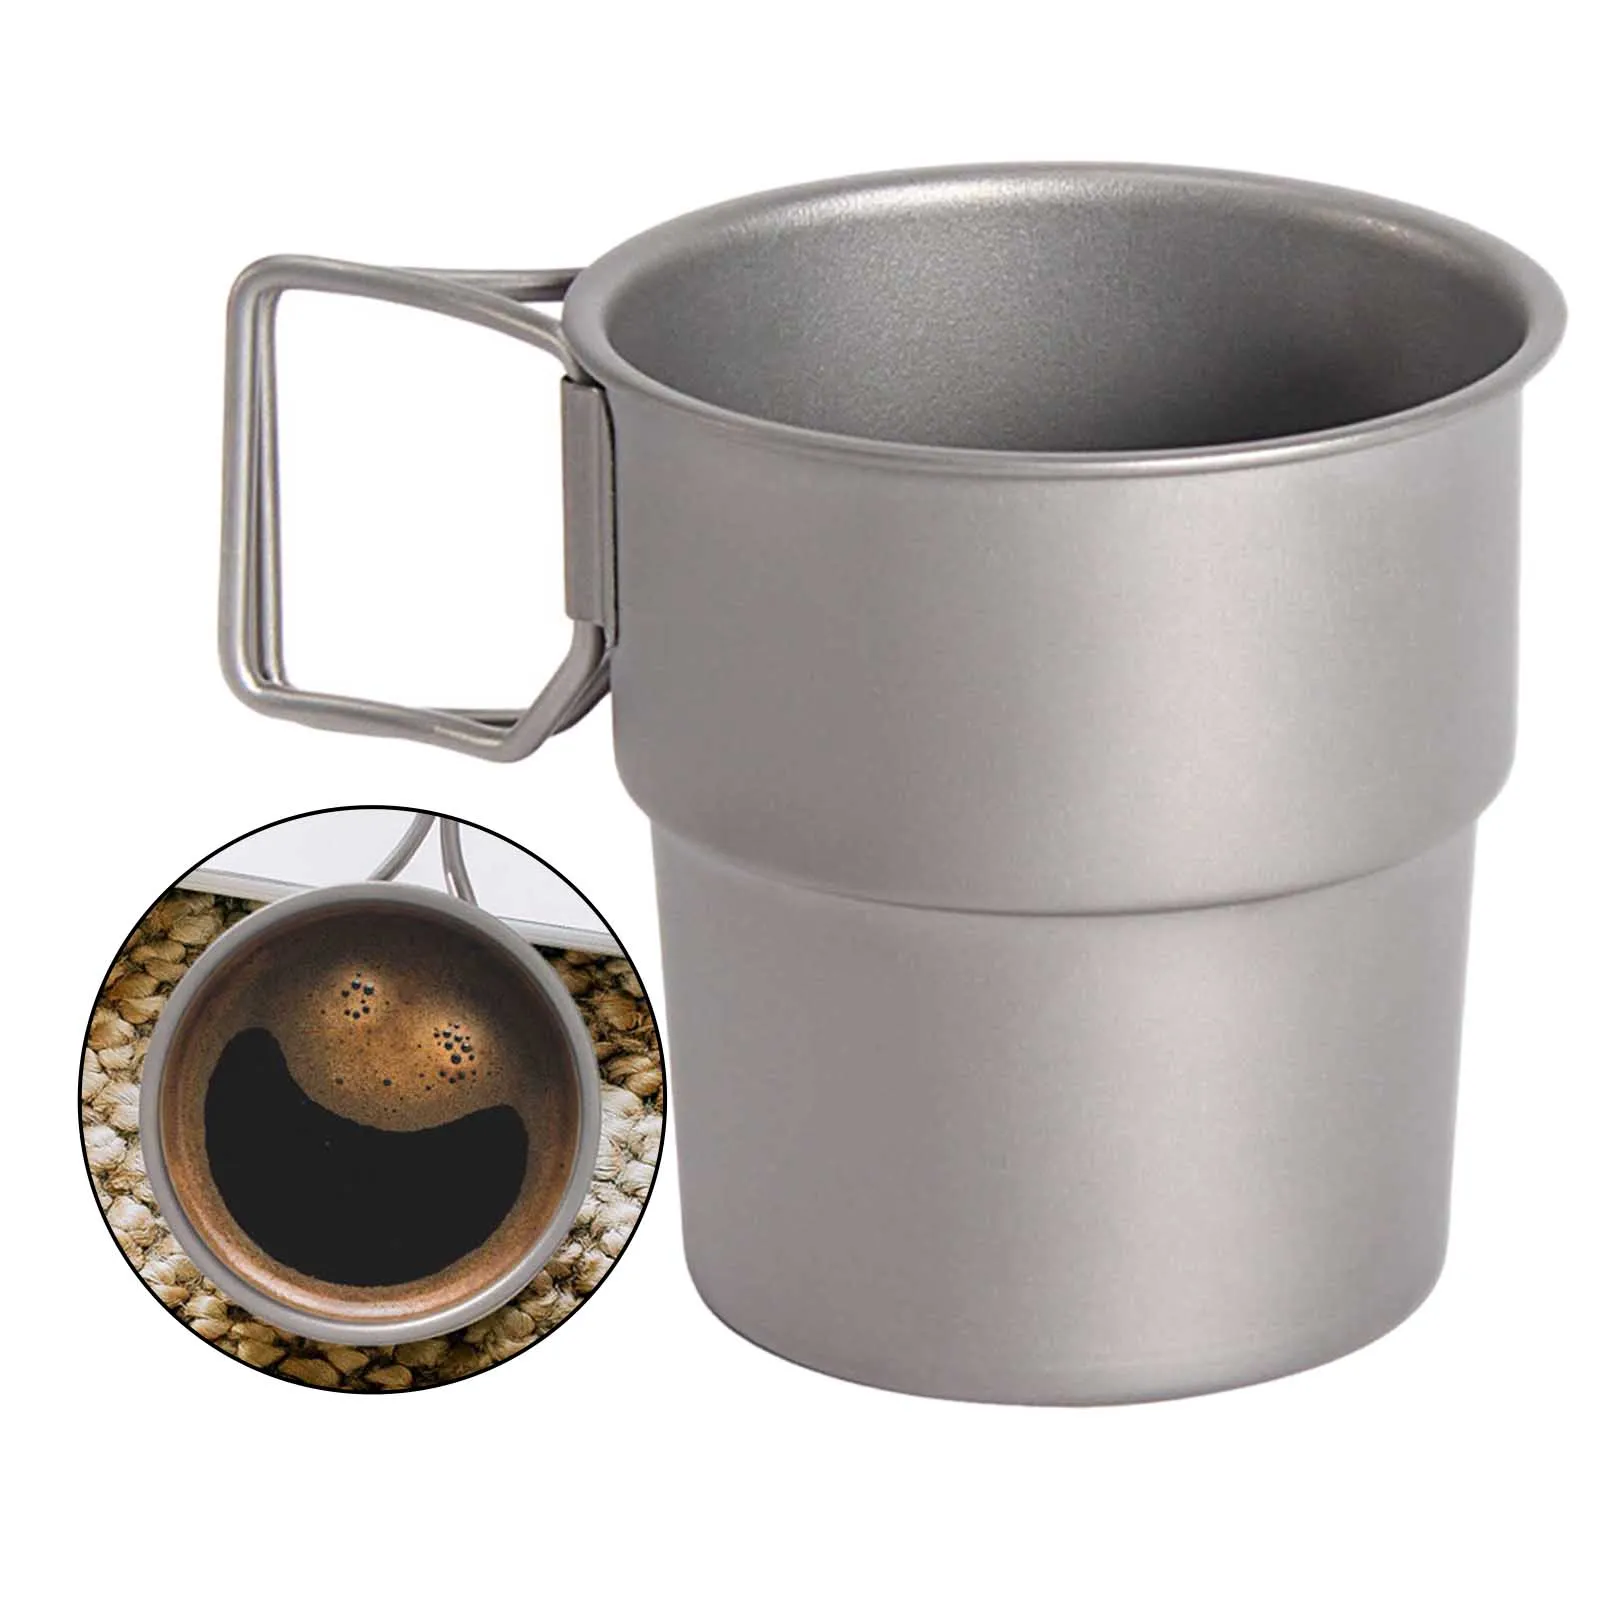 Stackable Cup for Drink Beer with Handle Coffee Mug Drinking Mug for Travel Outdoor Camping Home Hiking